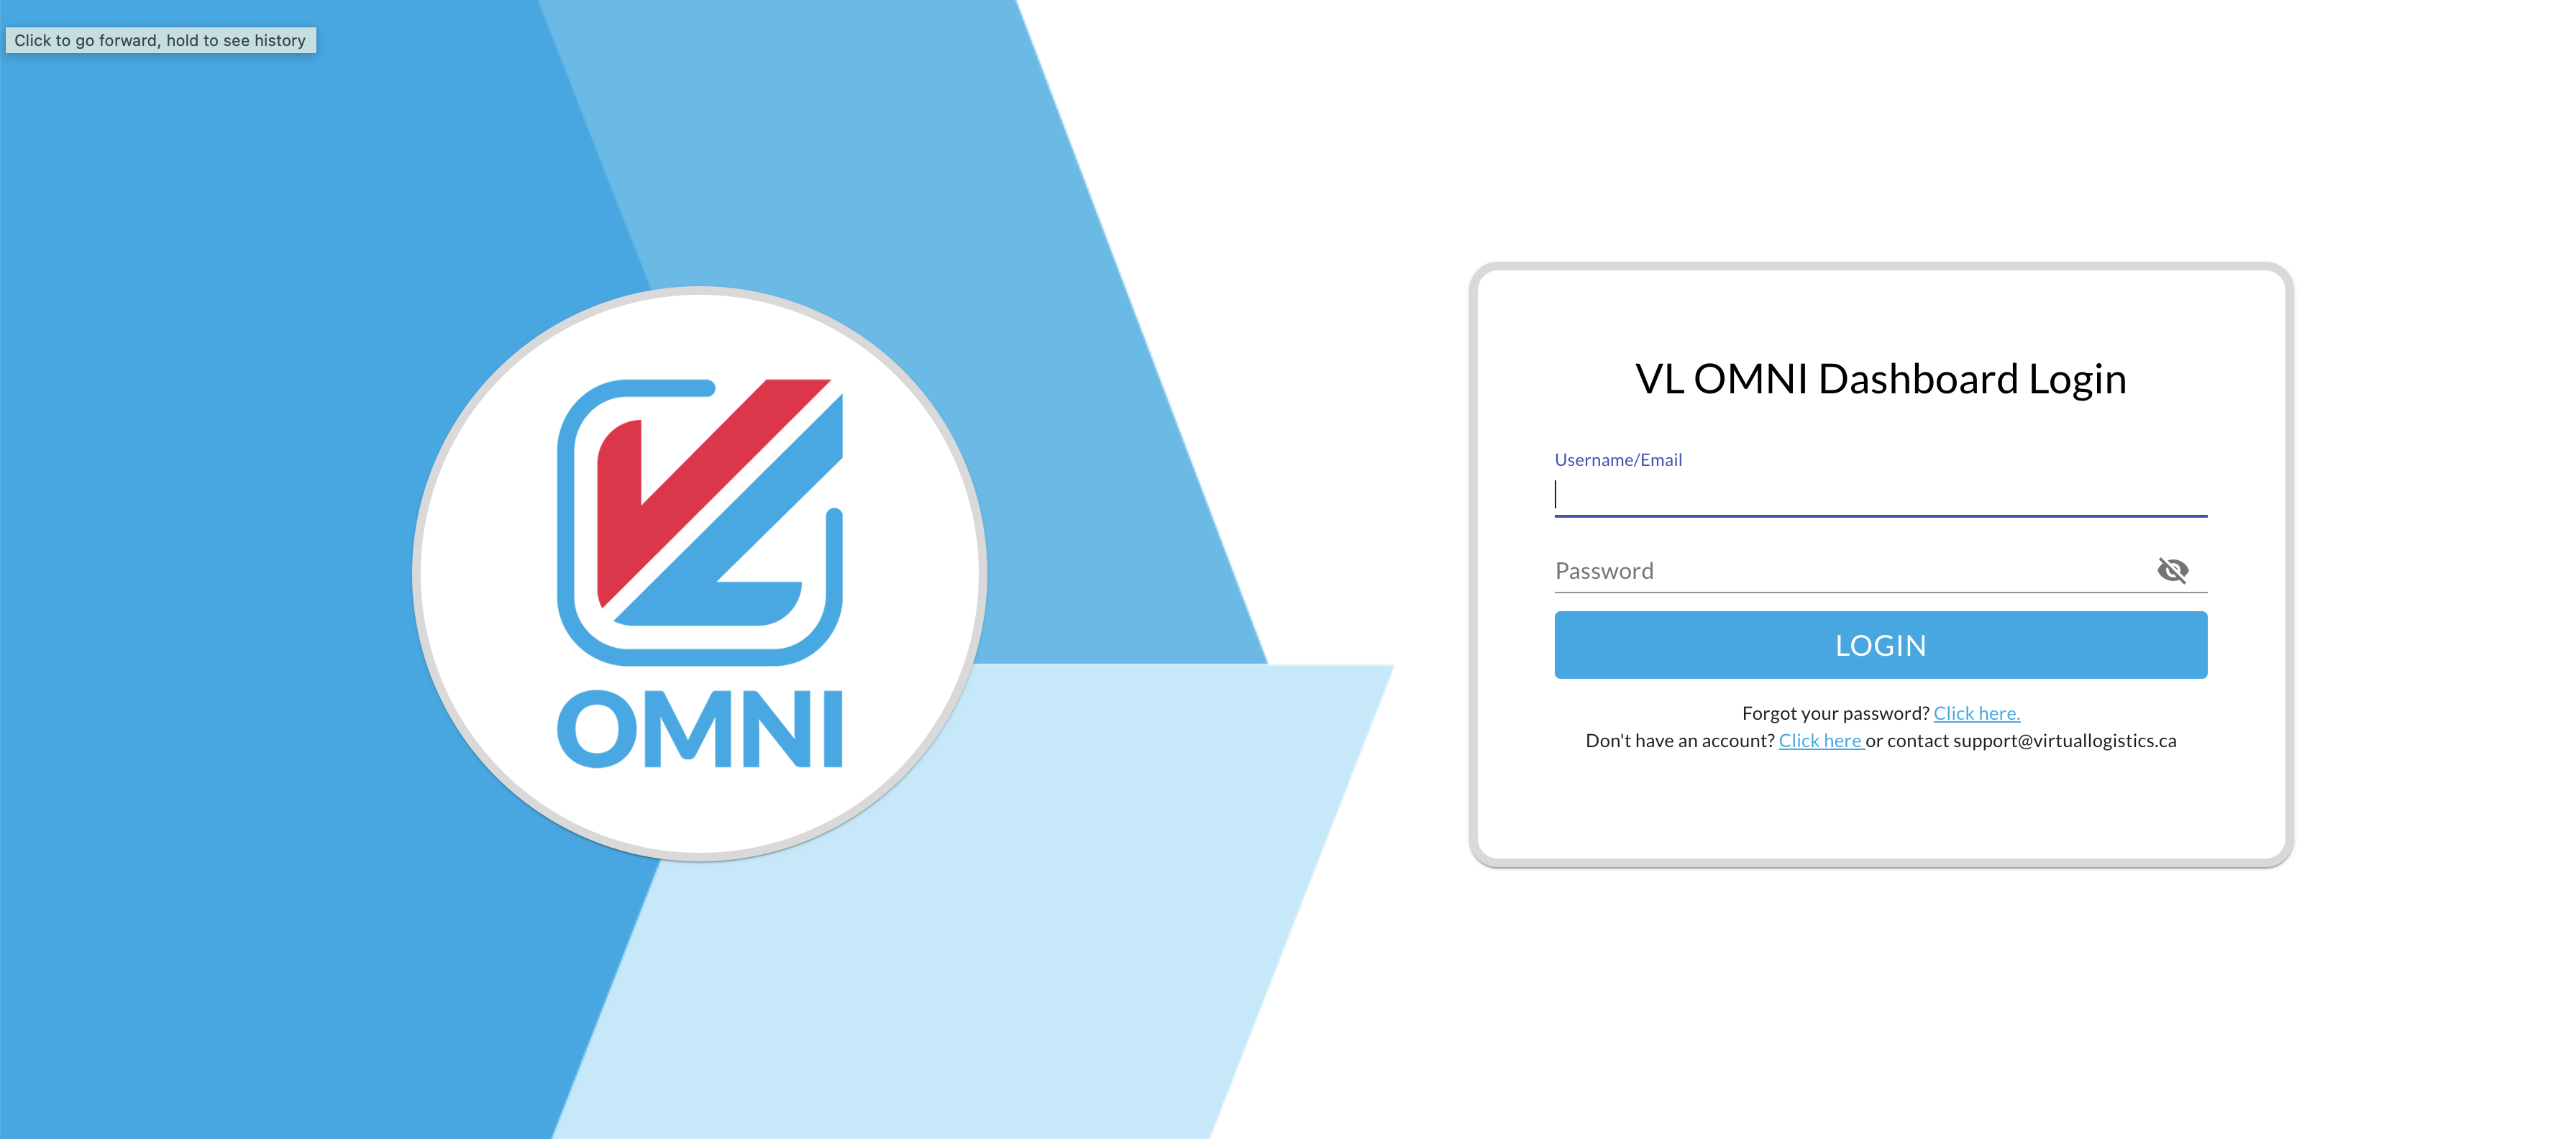 The login screen VL OMNI customers see when accessing the dashboard.